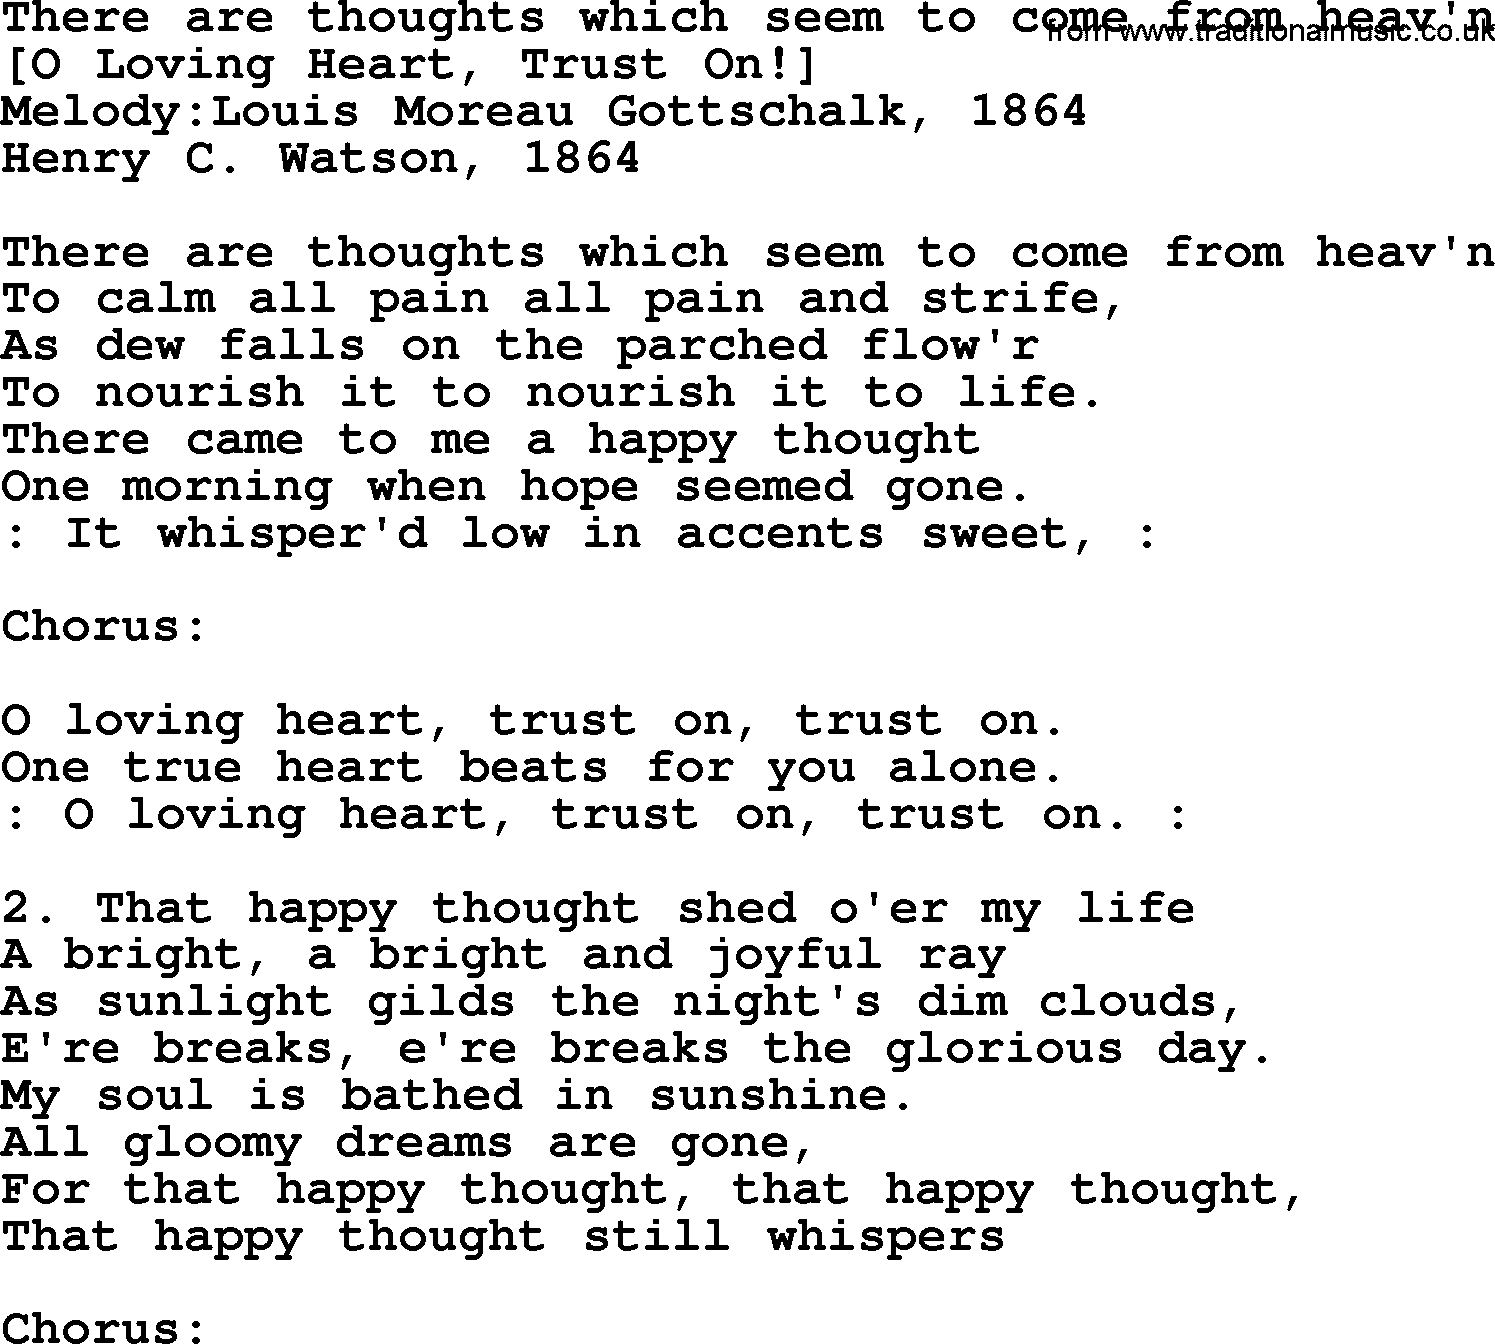 Old American Song: There Are Thoughts Which Seem To Come From Heav'n, lyrics